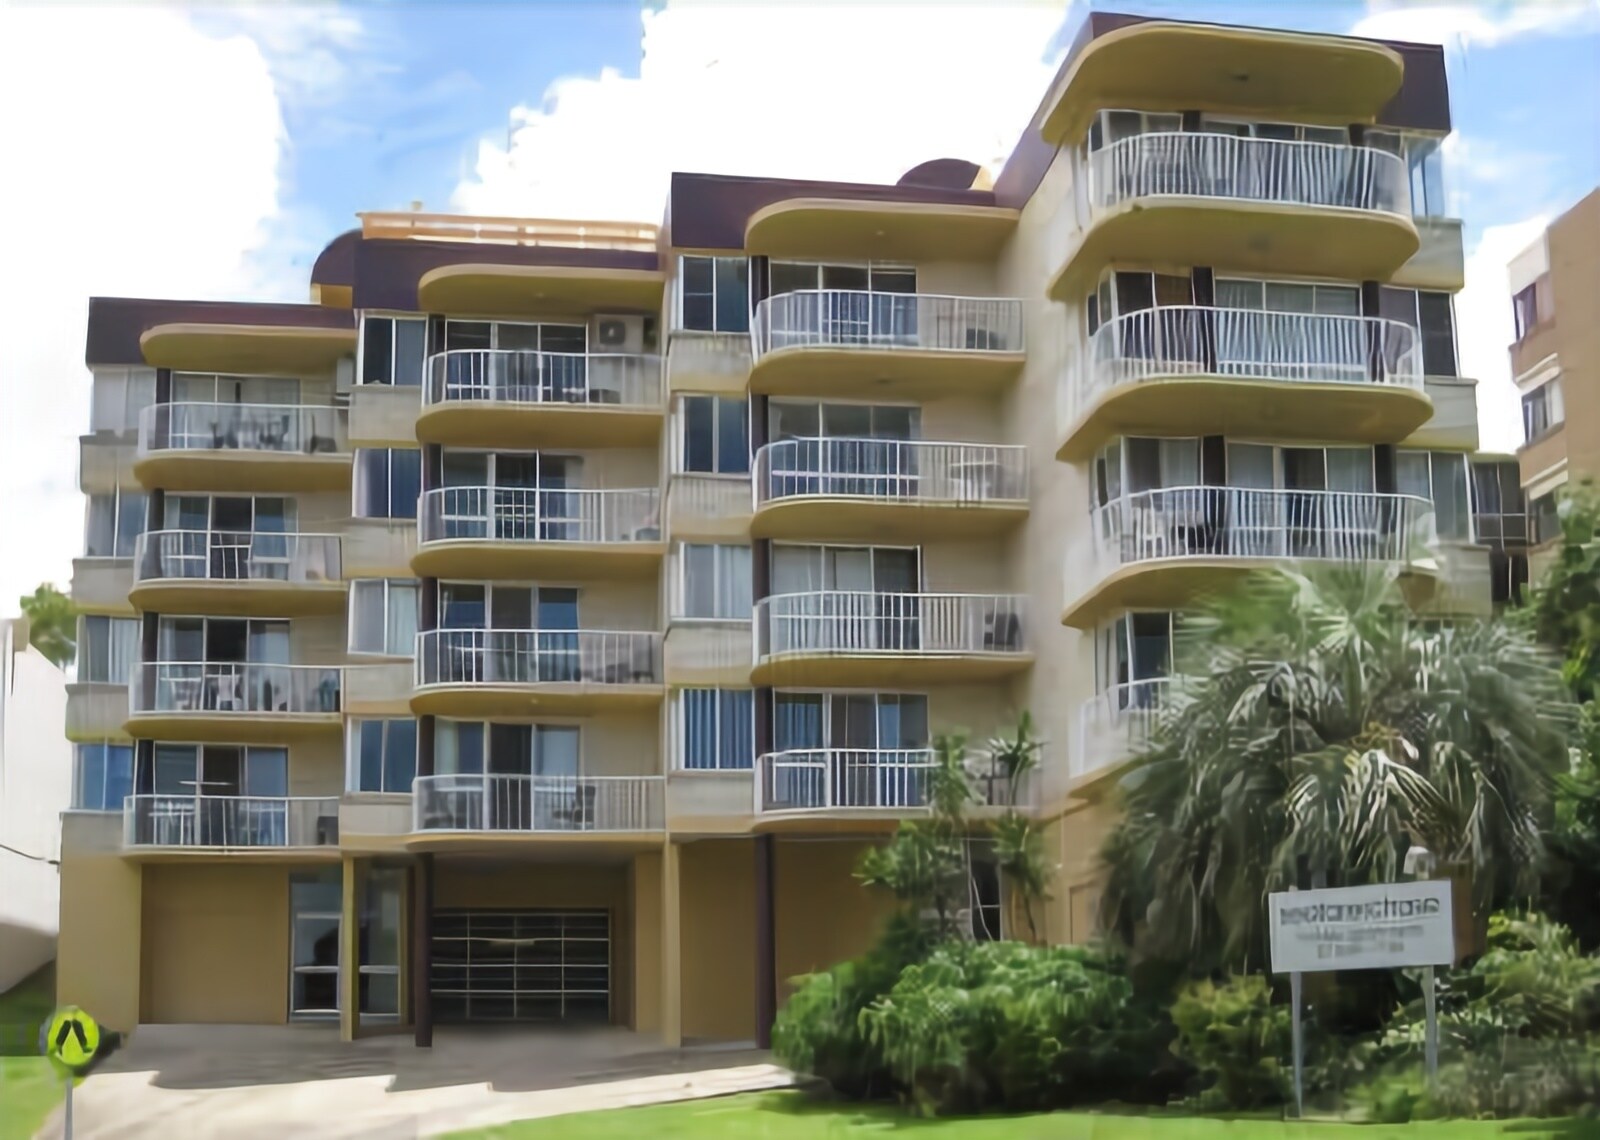 Seafarer Chase Holiday Apartments